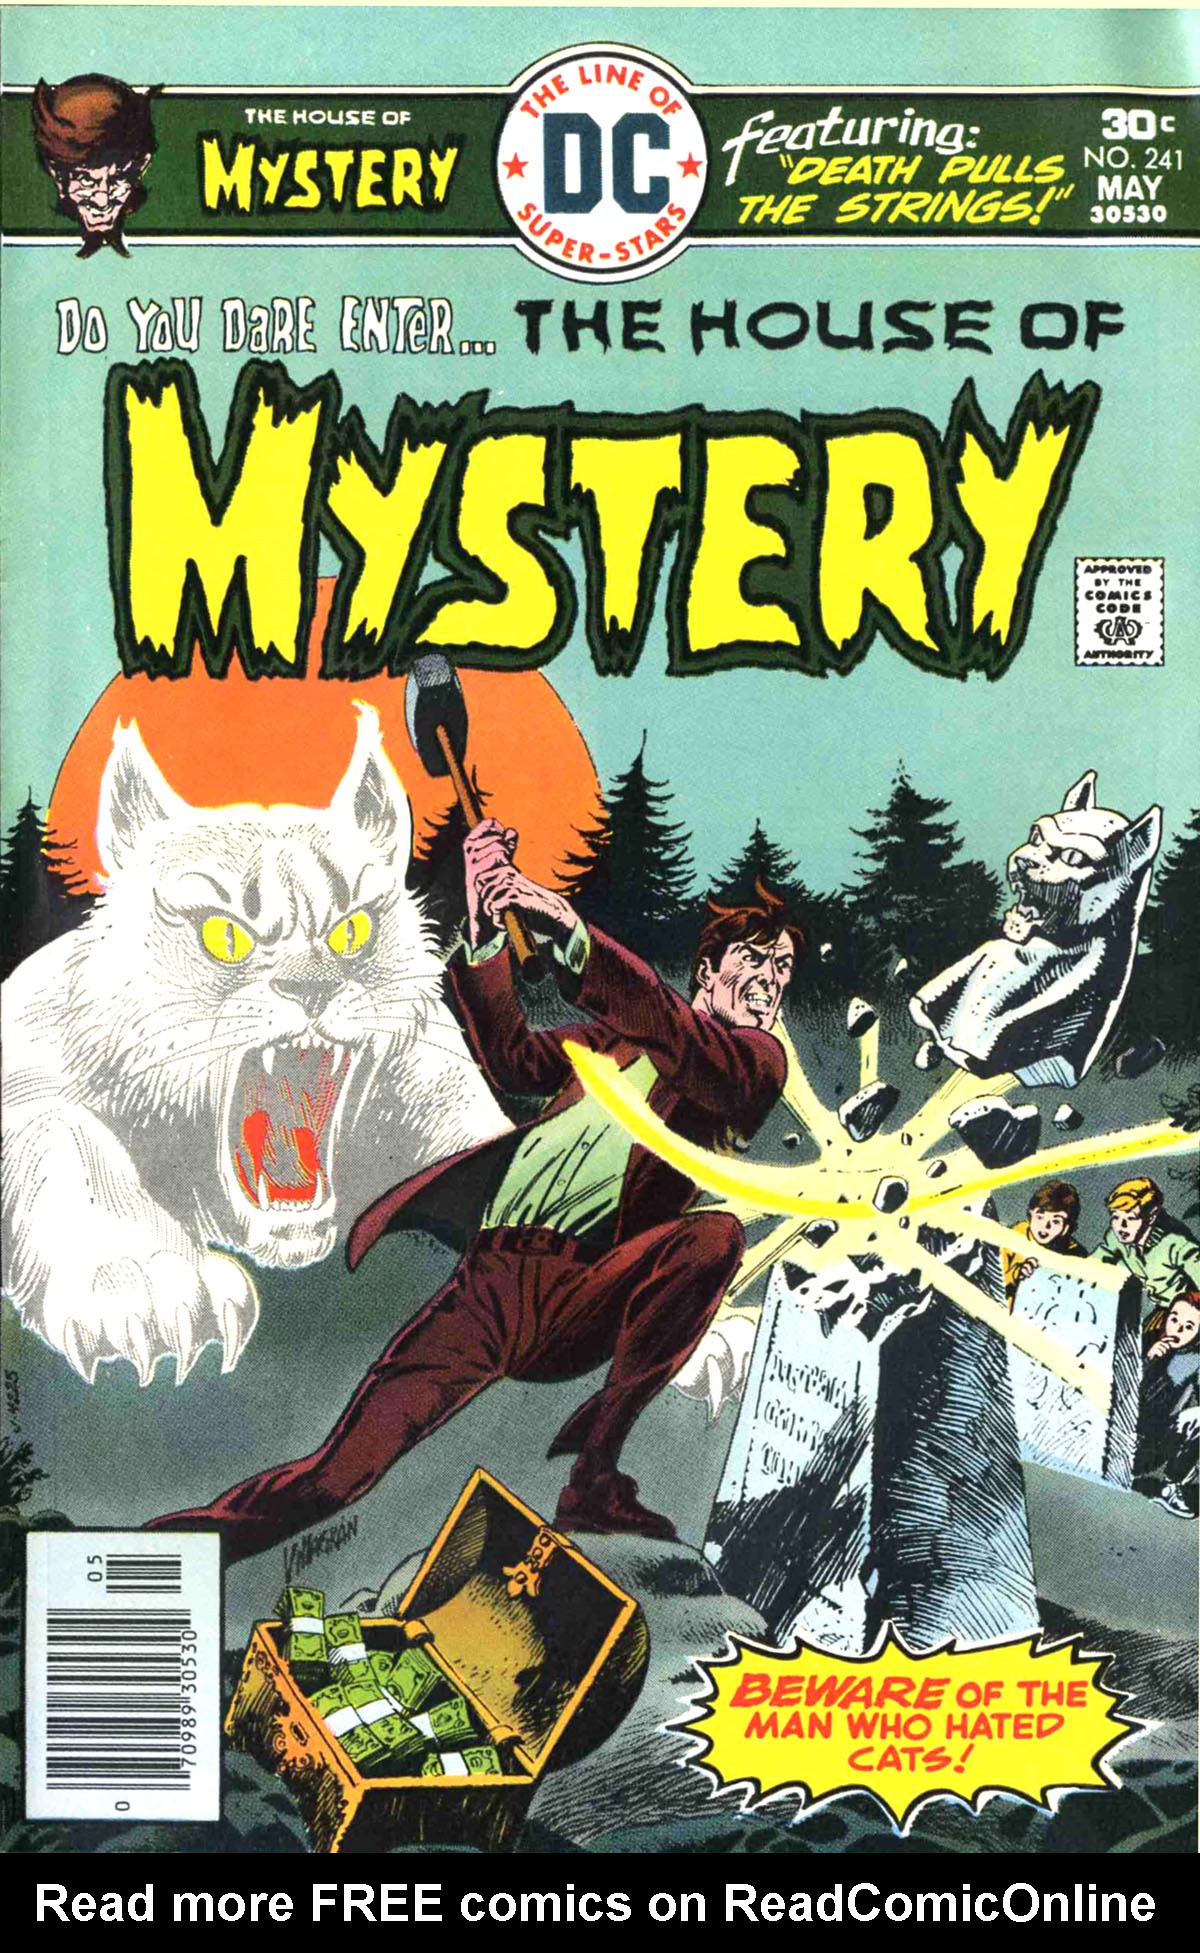 Read online House of Mystery (1951) comic -  Issue #241 - 1